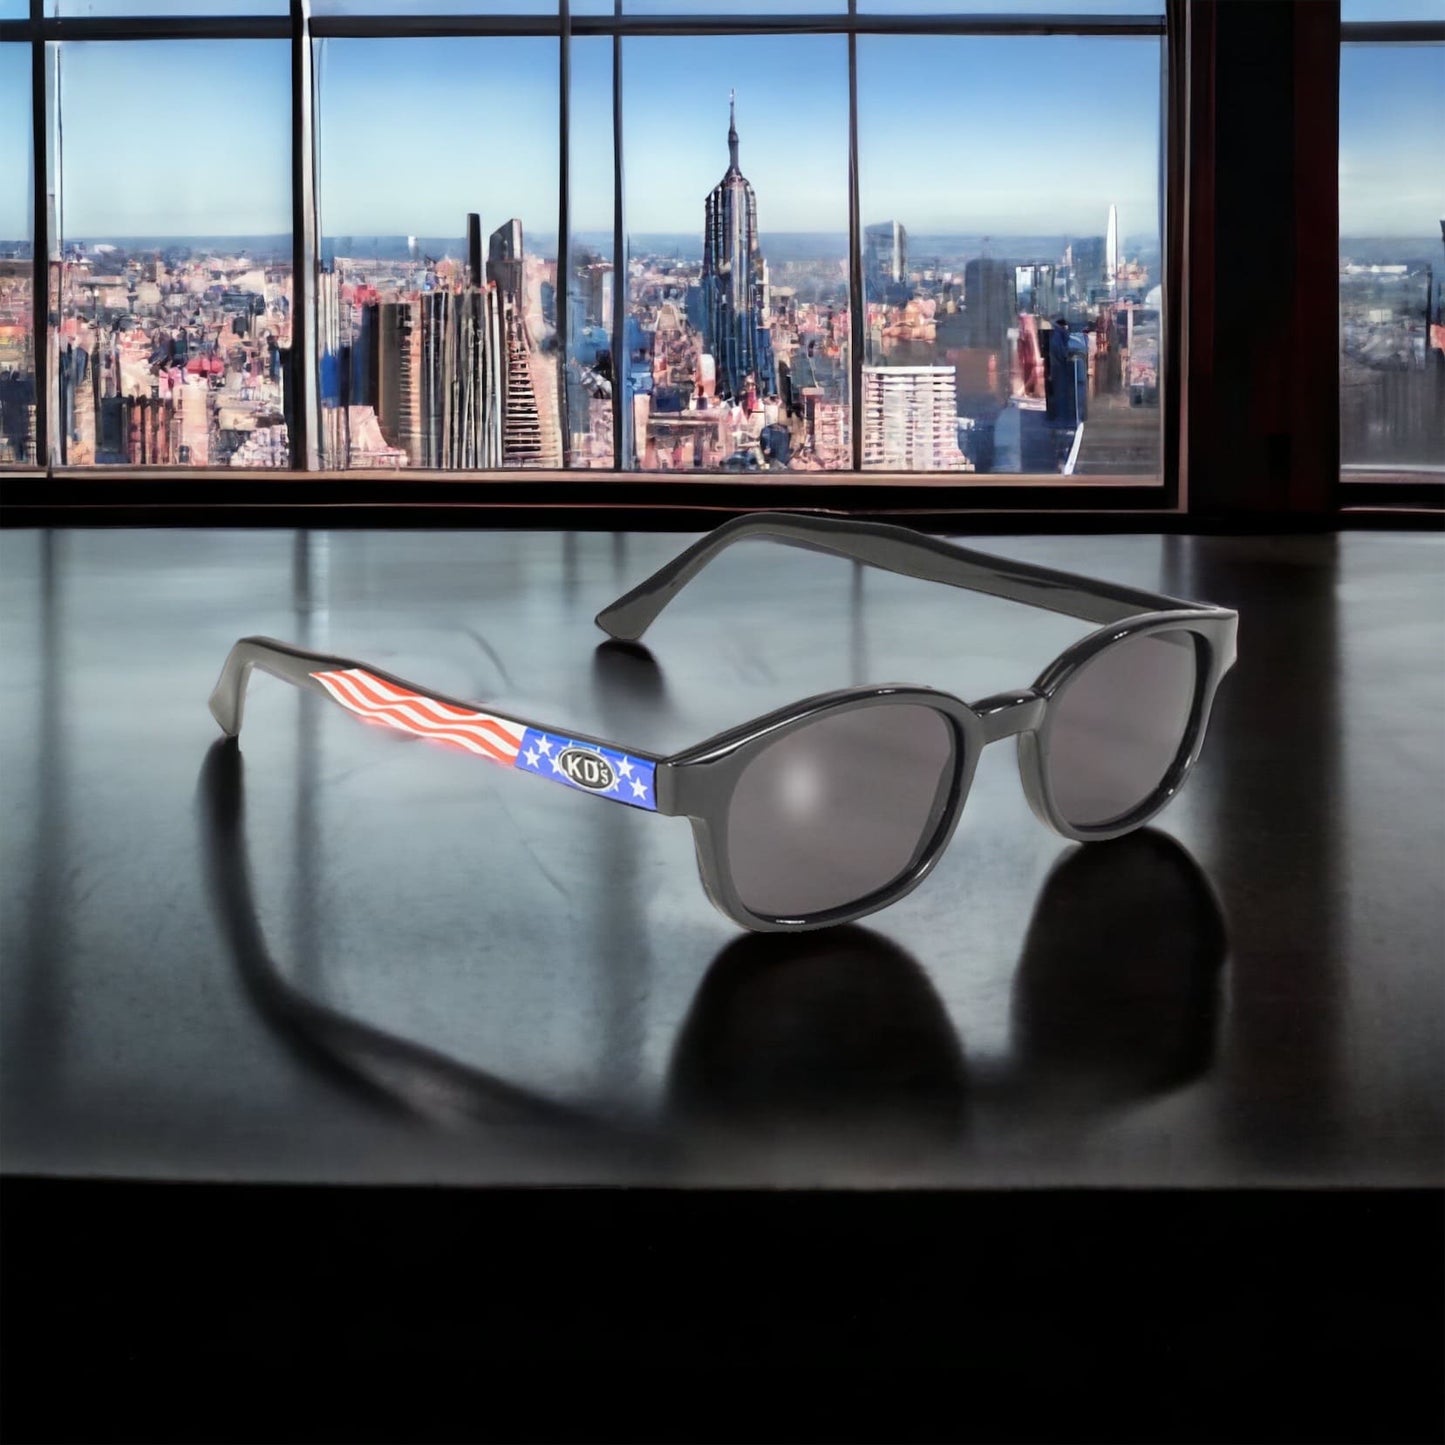 X-KD's 10050 large sunglasses with gray polycarbonate lenses and a USA flag frame set on a desk with a view of New York.